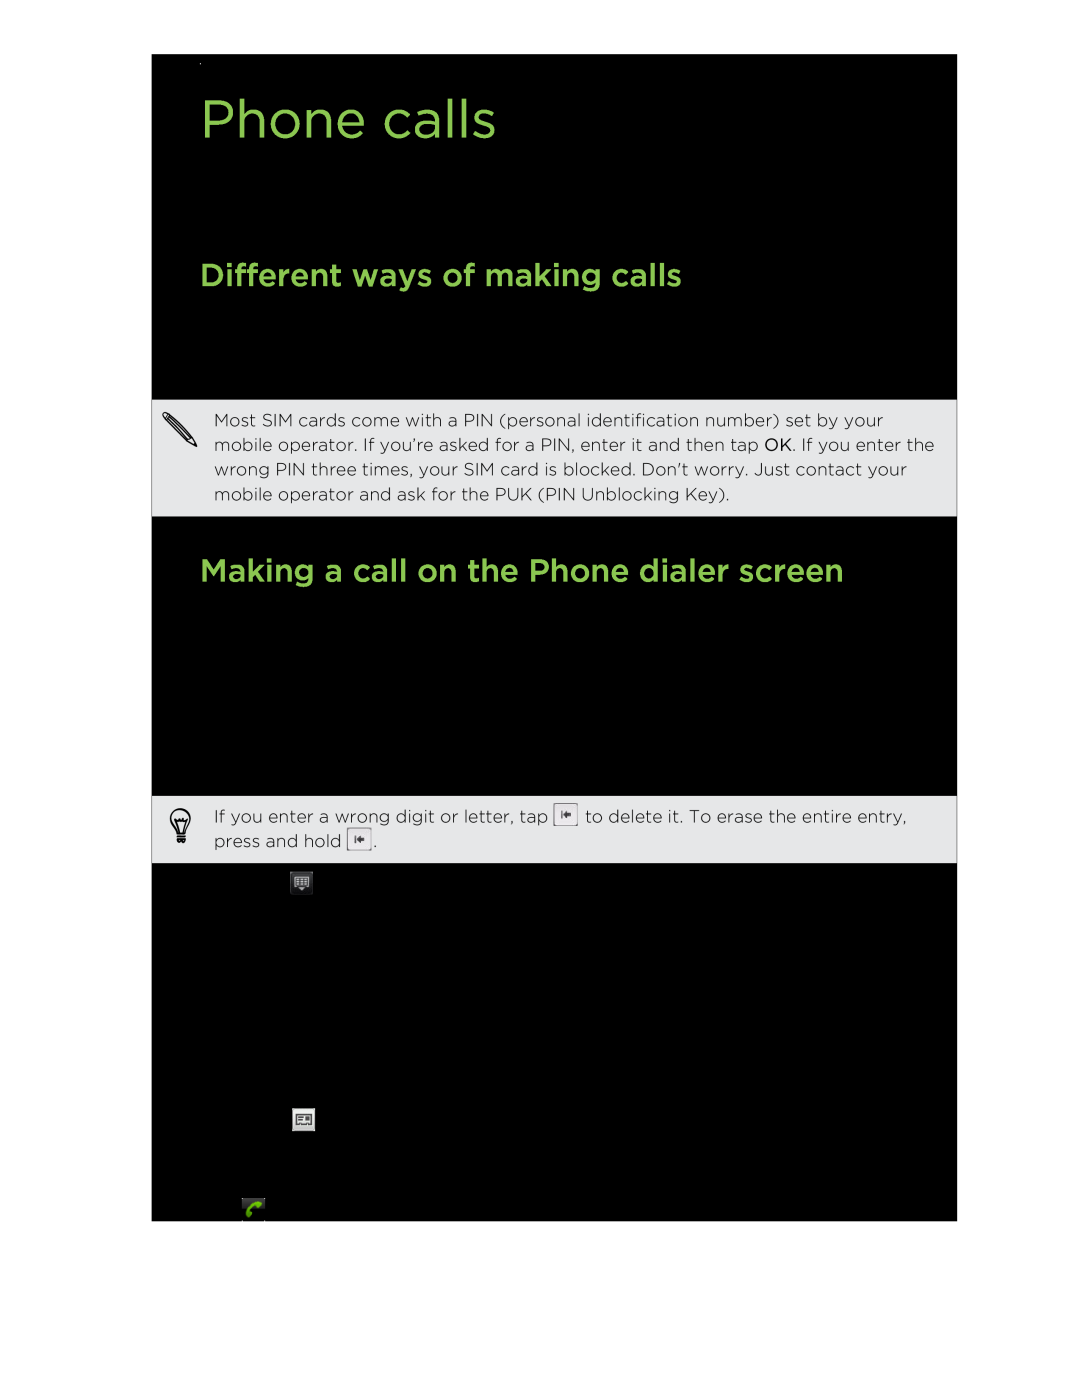 HTC S manual Phone calls, Different ways of making calls, Making a call on the Phone dialer screen 